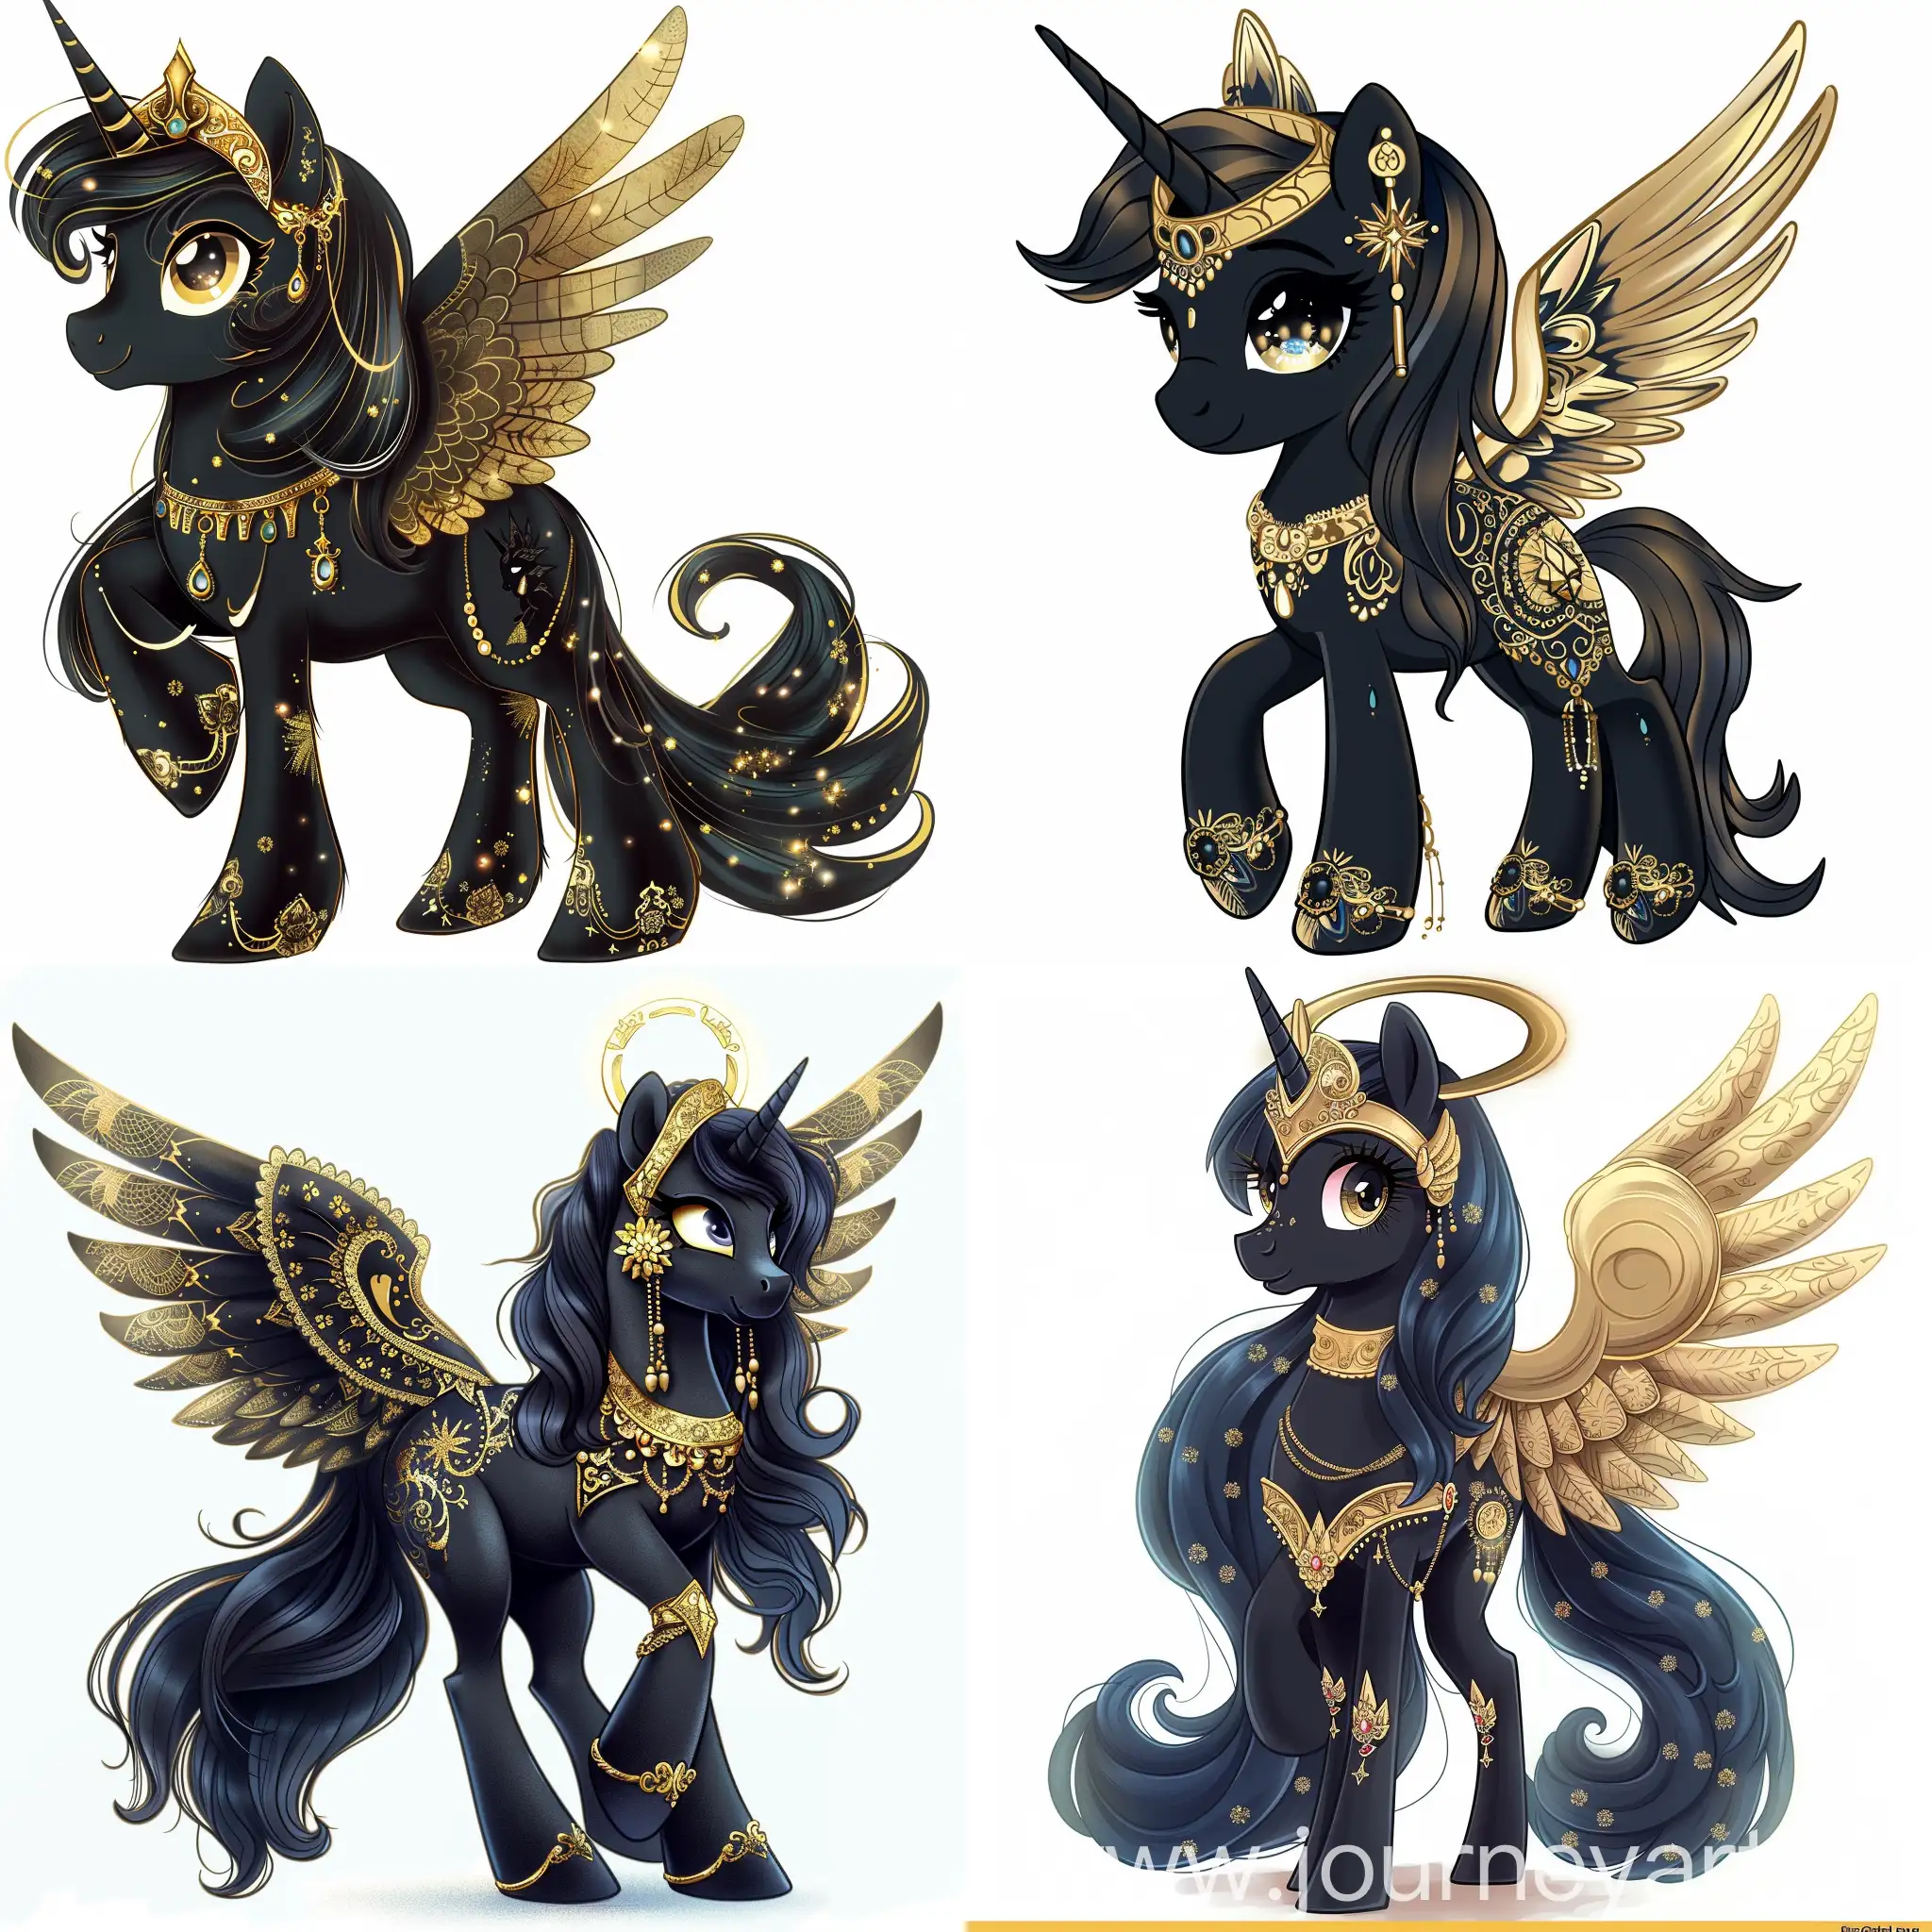 Elegant-Black-Pony-with-Golden-Jewelry-and-Halo-Wings